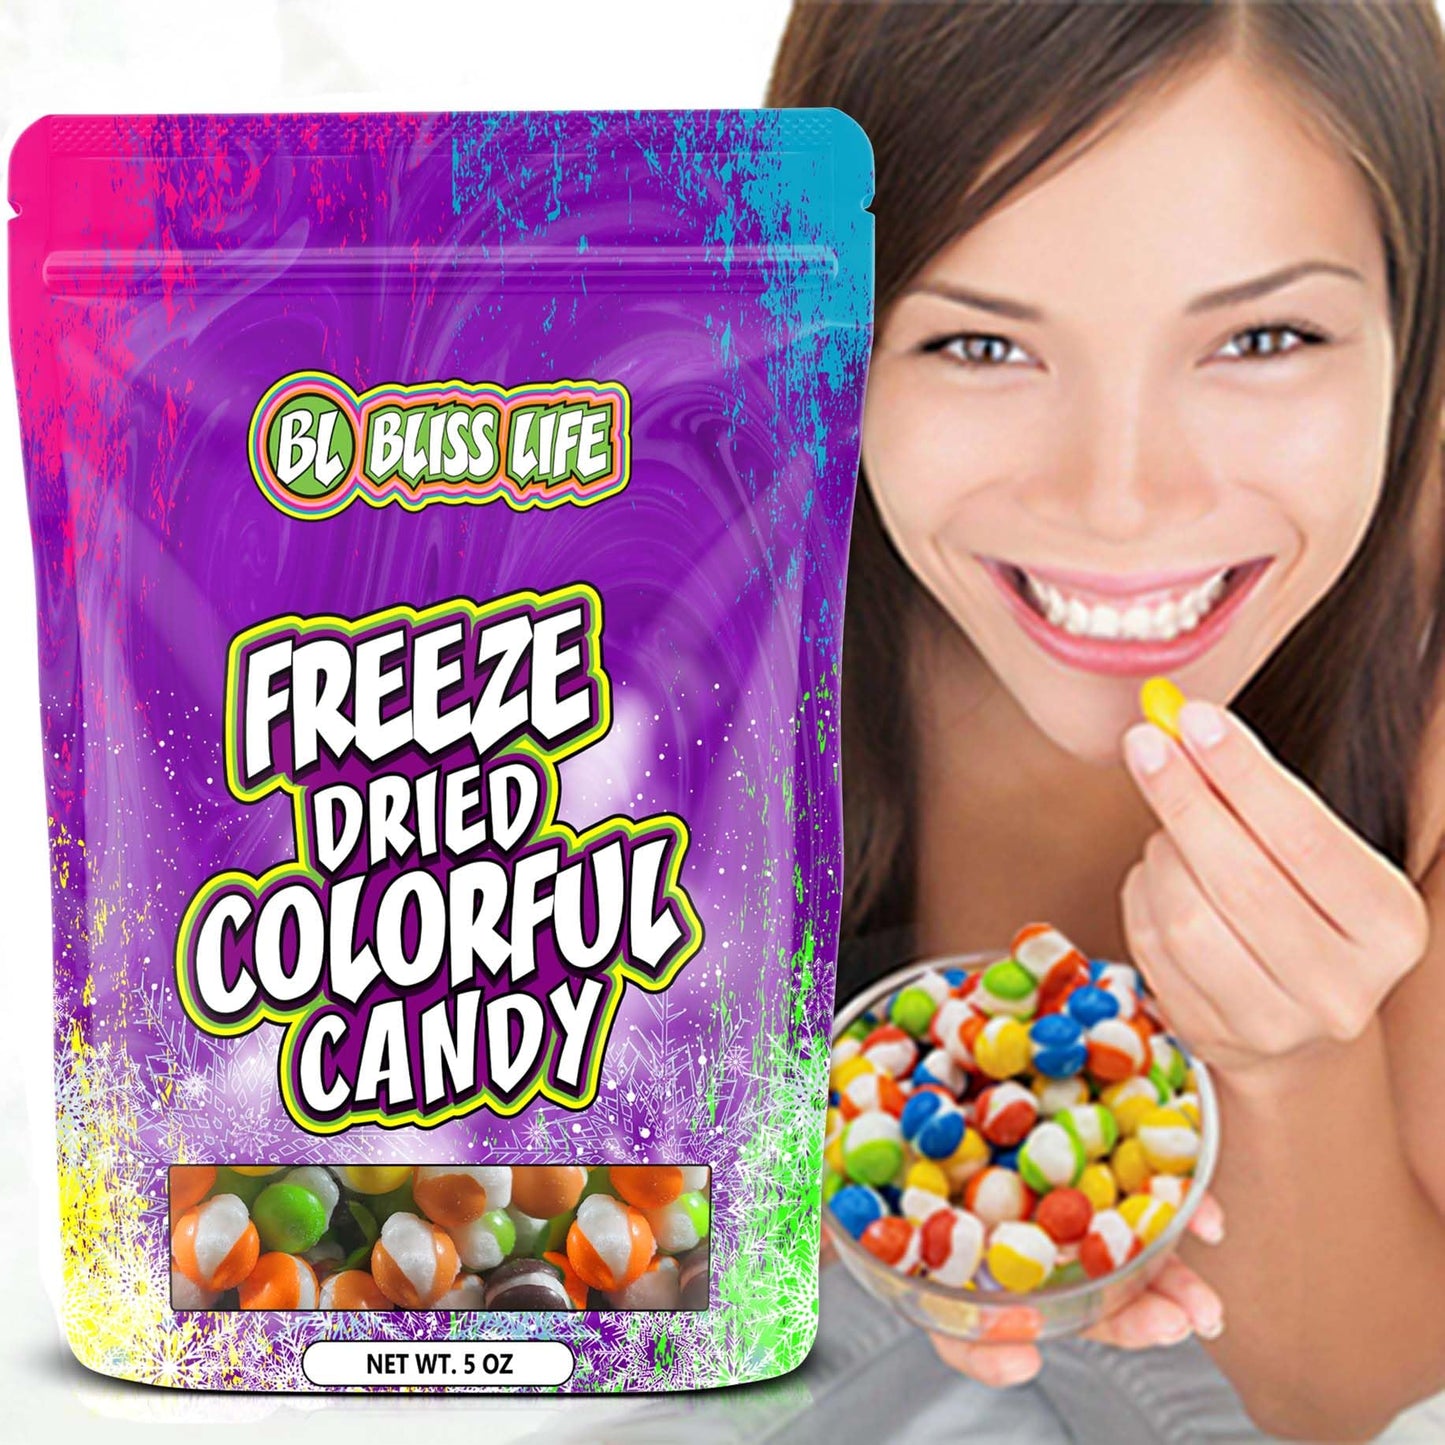 3 Flavor Variety Pack of Bliss Life Freeze Dried Colorful Candy Bliss